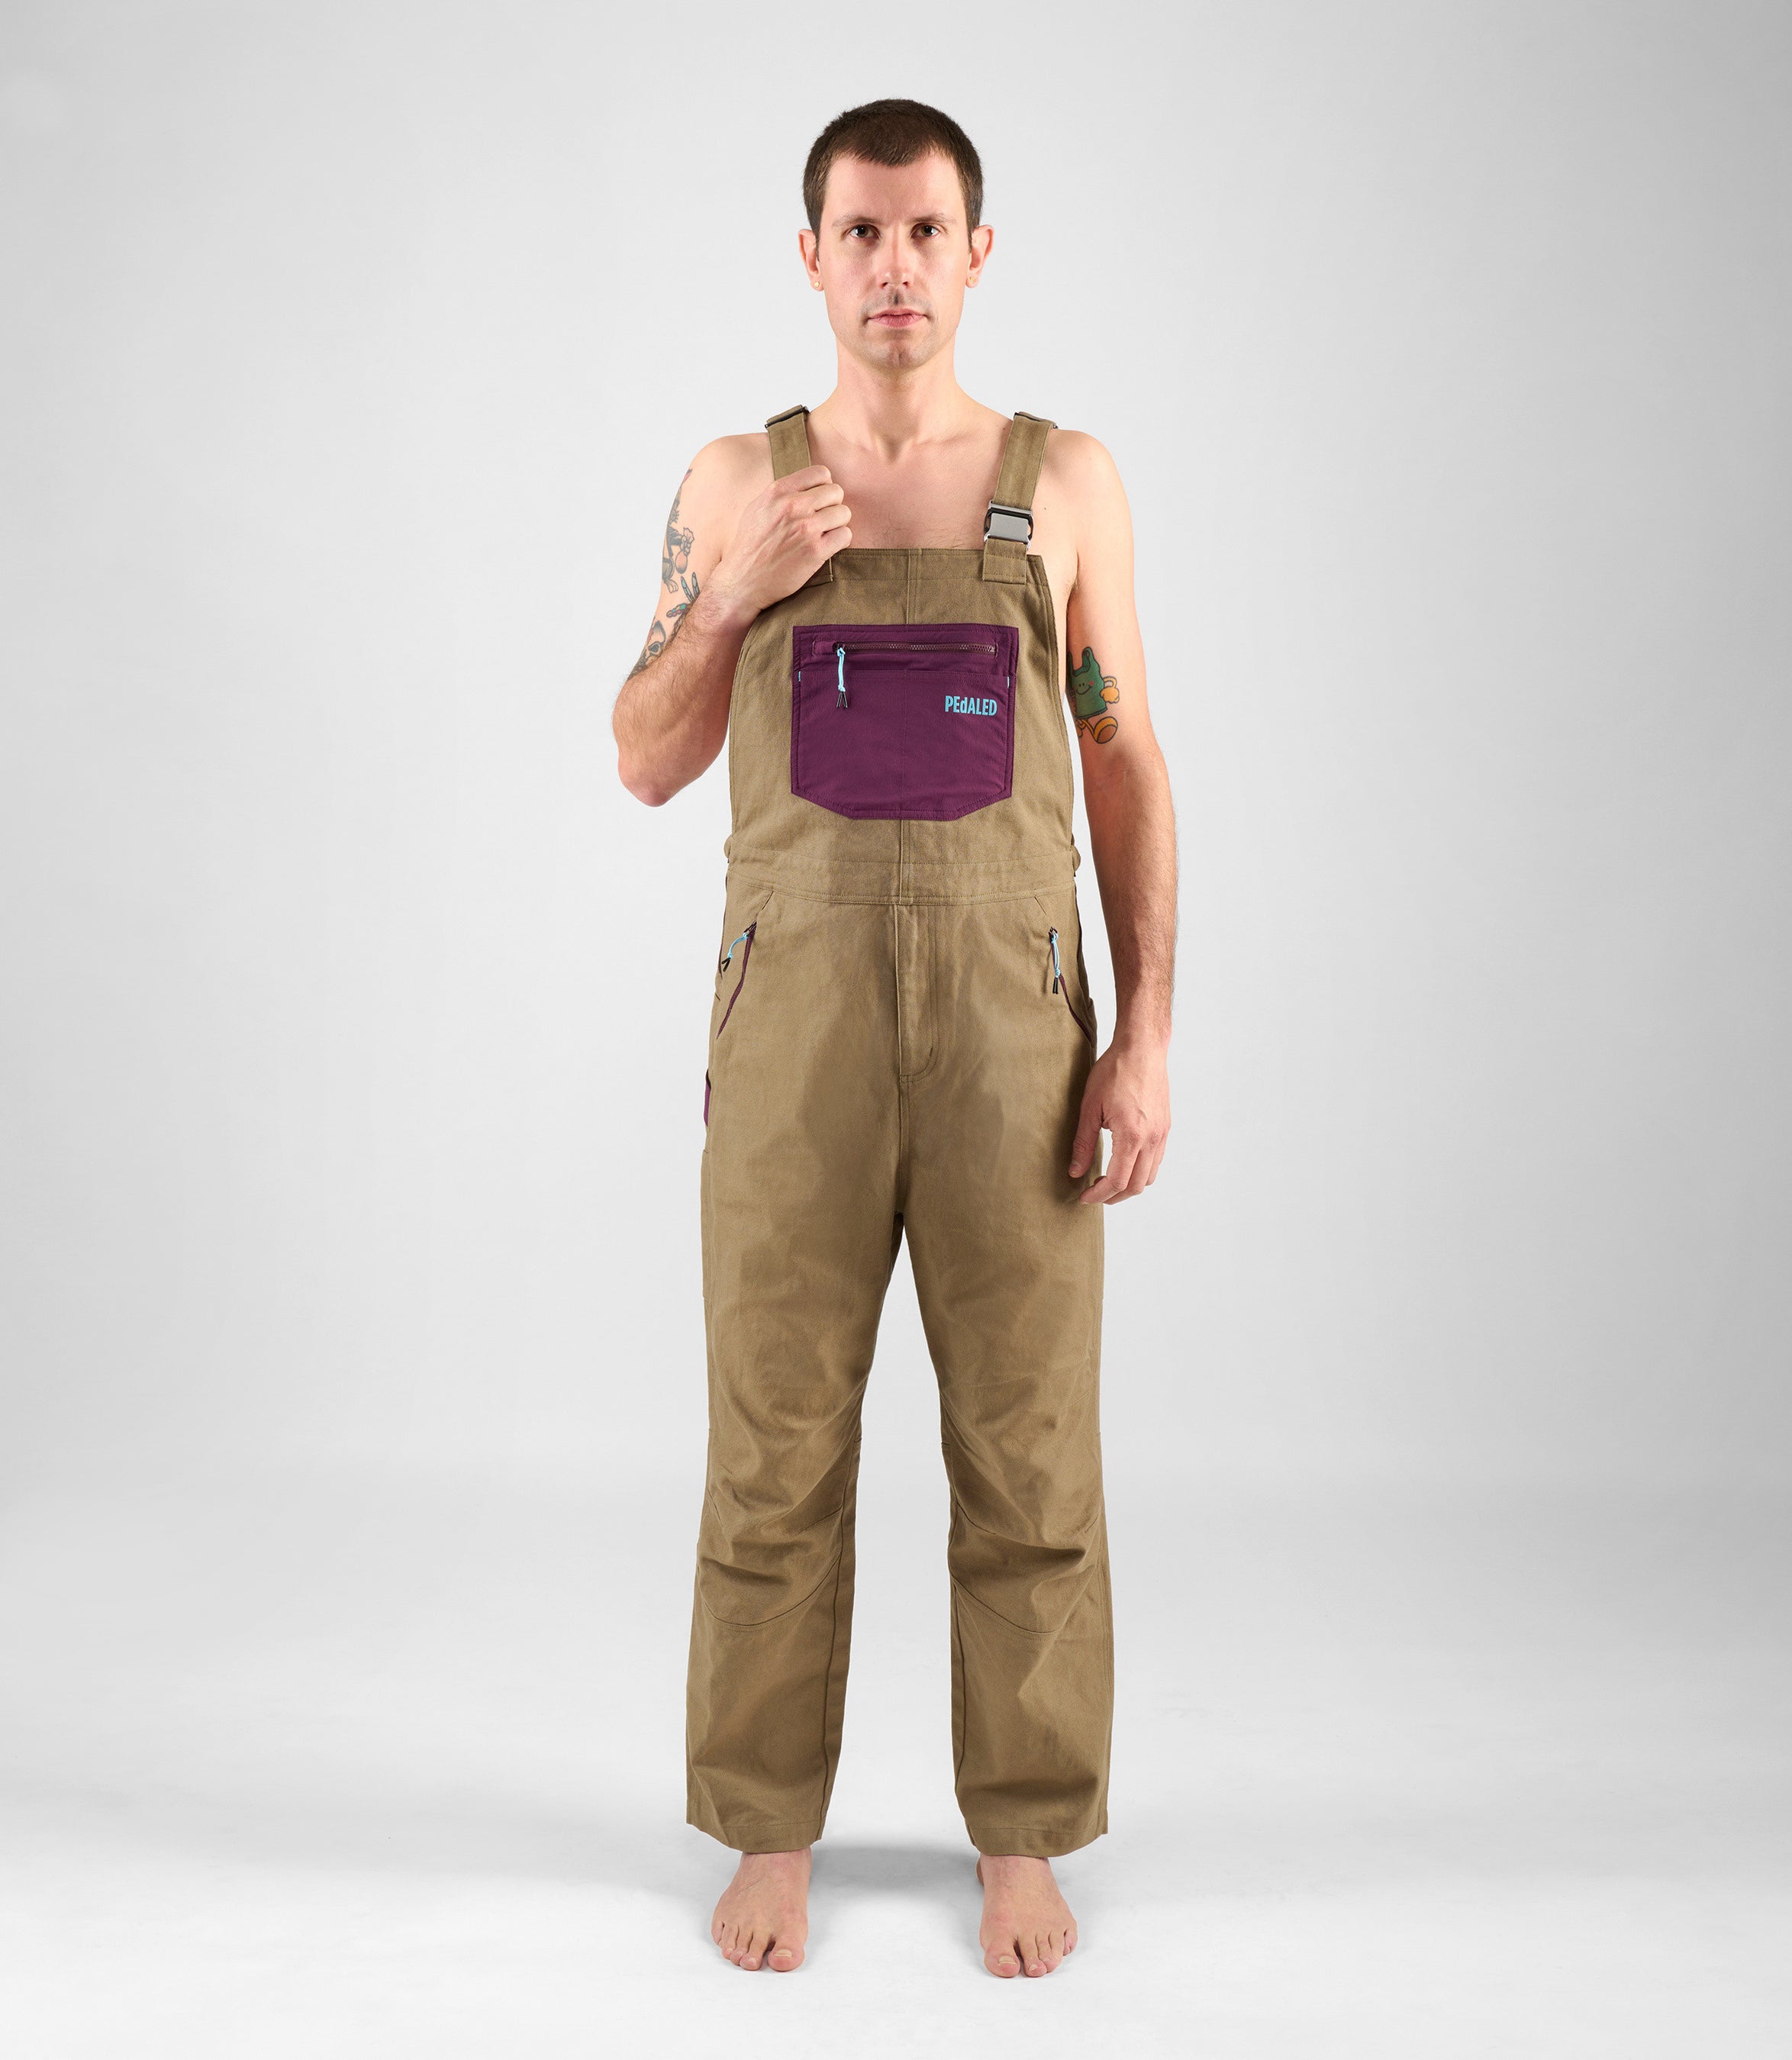 24SOVYA14PE_9_overall brown yama total body 2 front pedaled